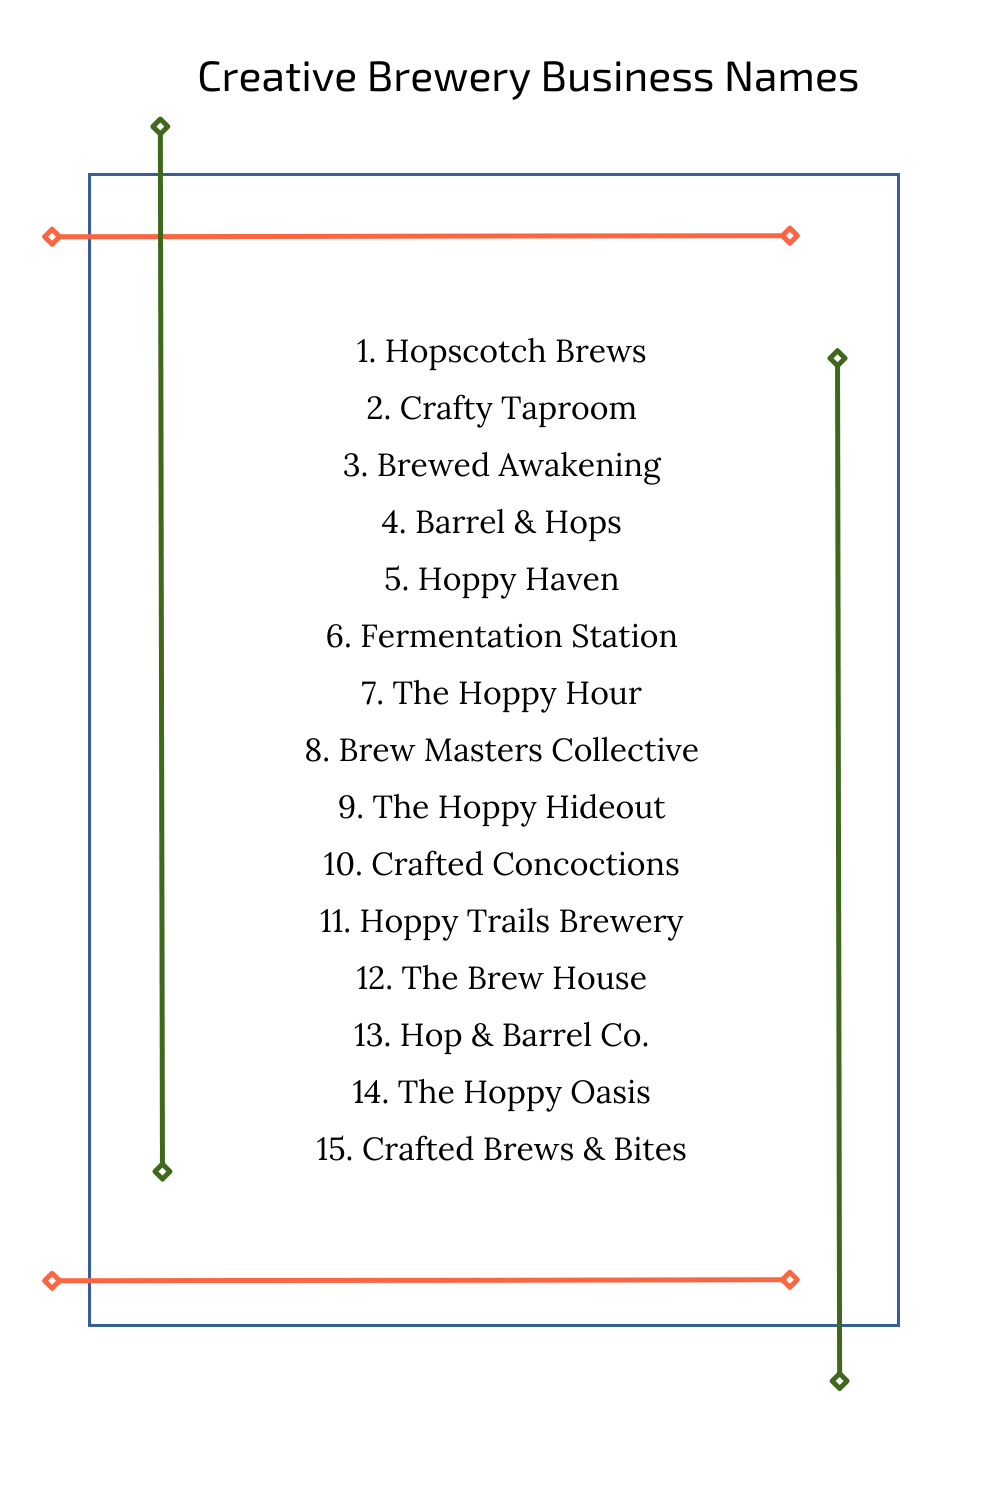 Creative Brewery Business Names